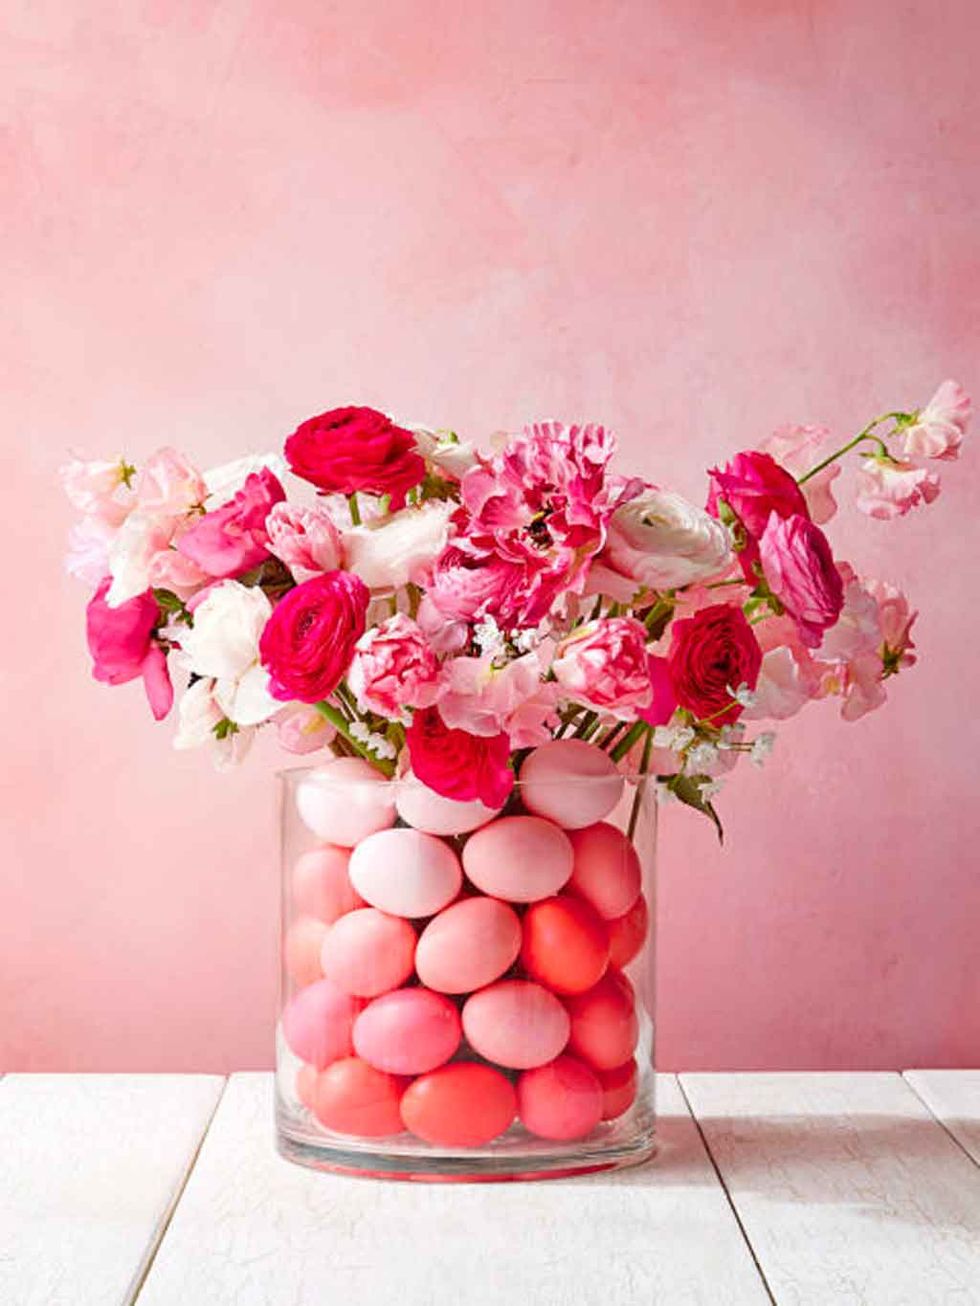 3. Bouquet With Easter Eggs